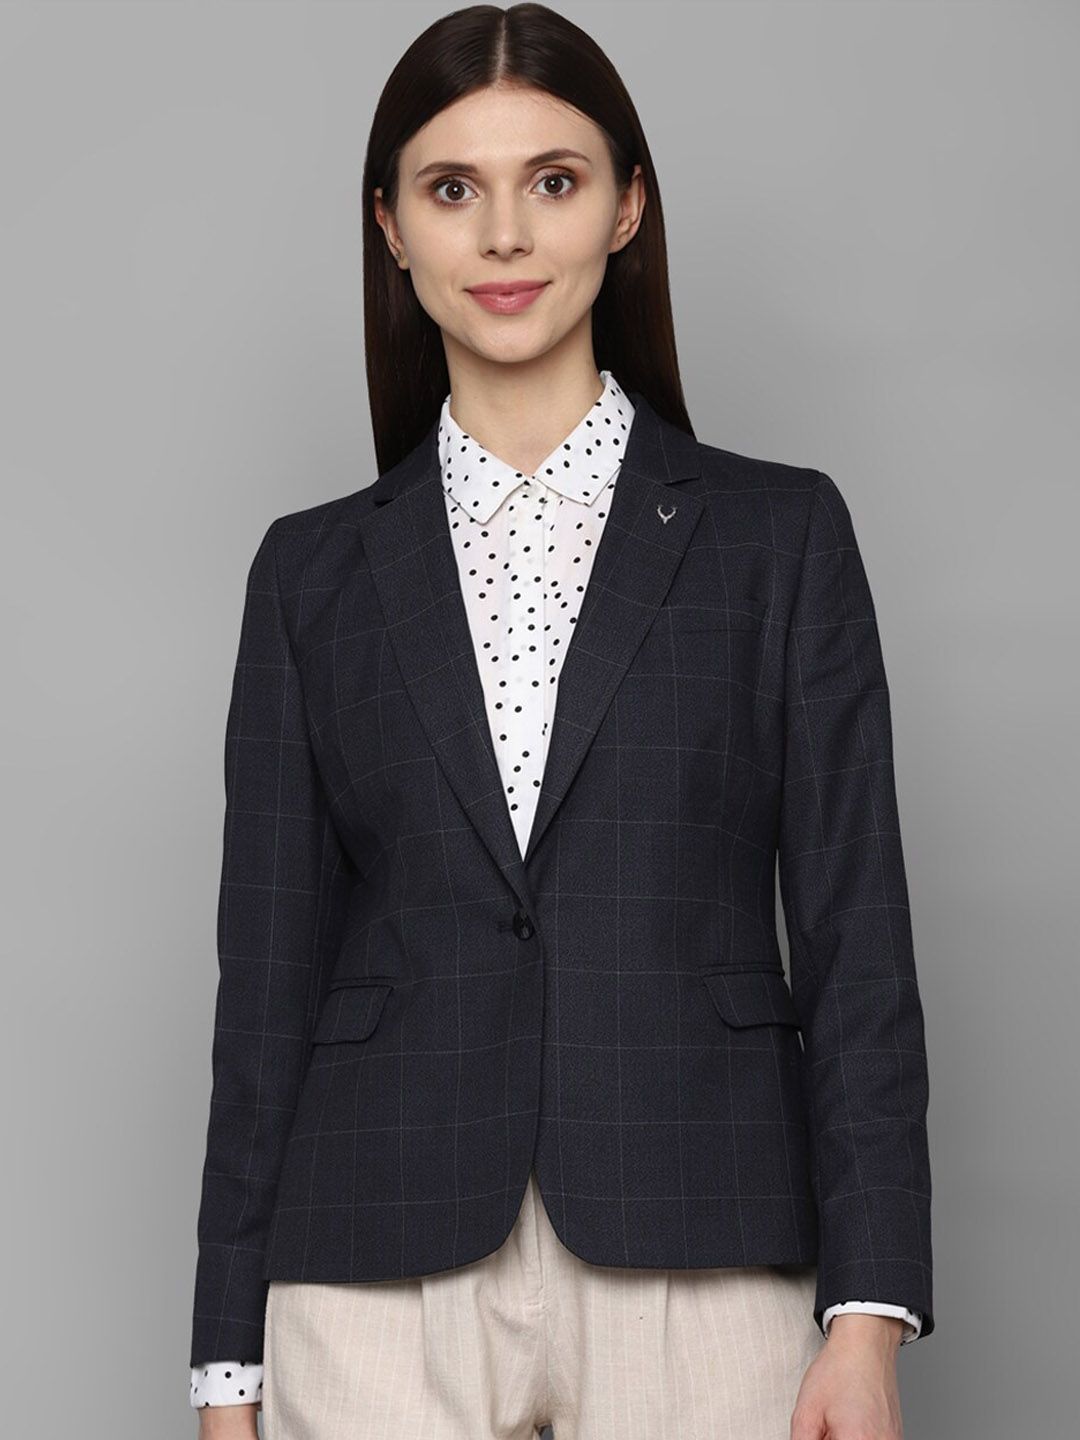 Allen Solly Woman Black Checked Single-Breasted Casual Blazer Price in India